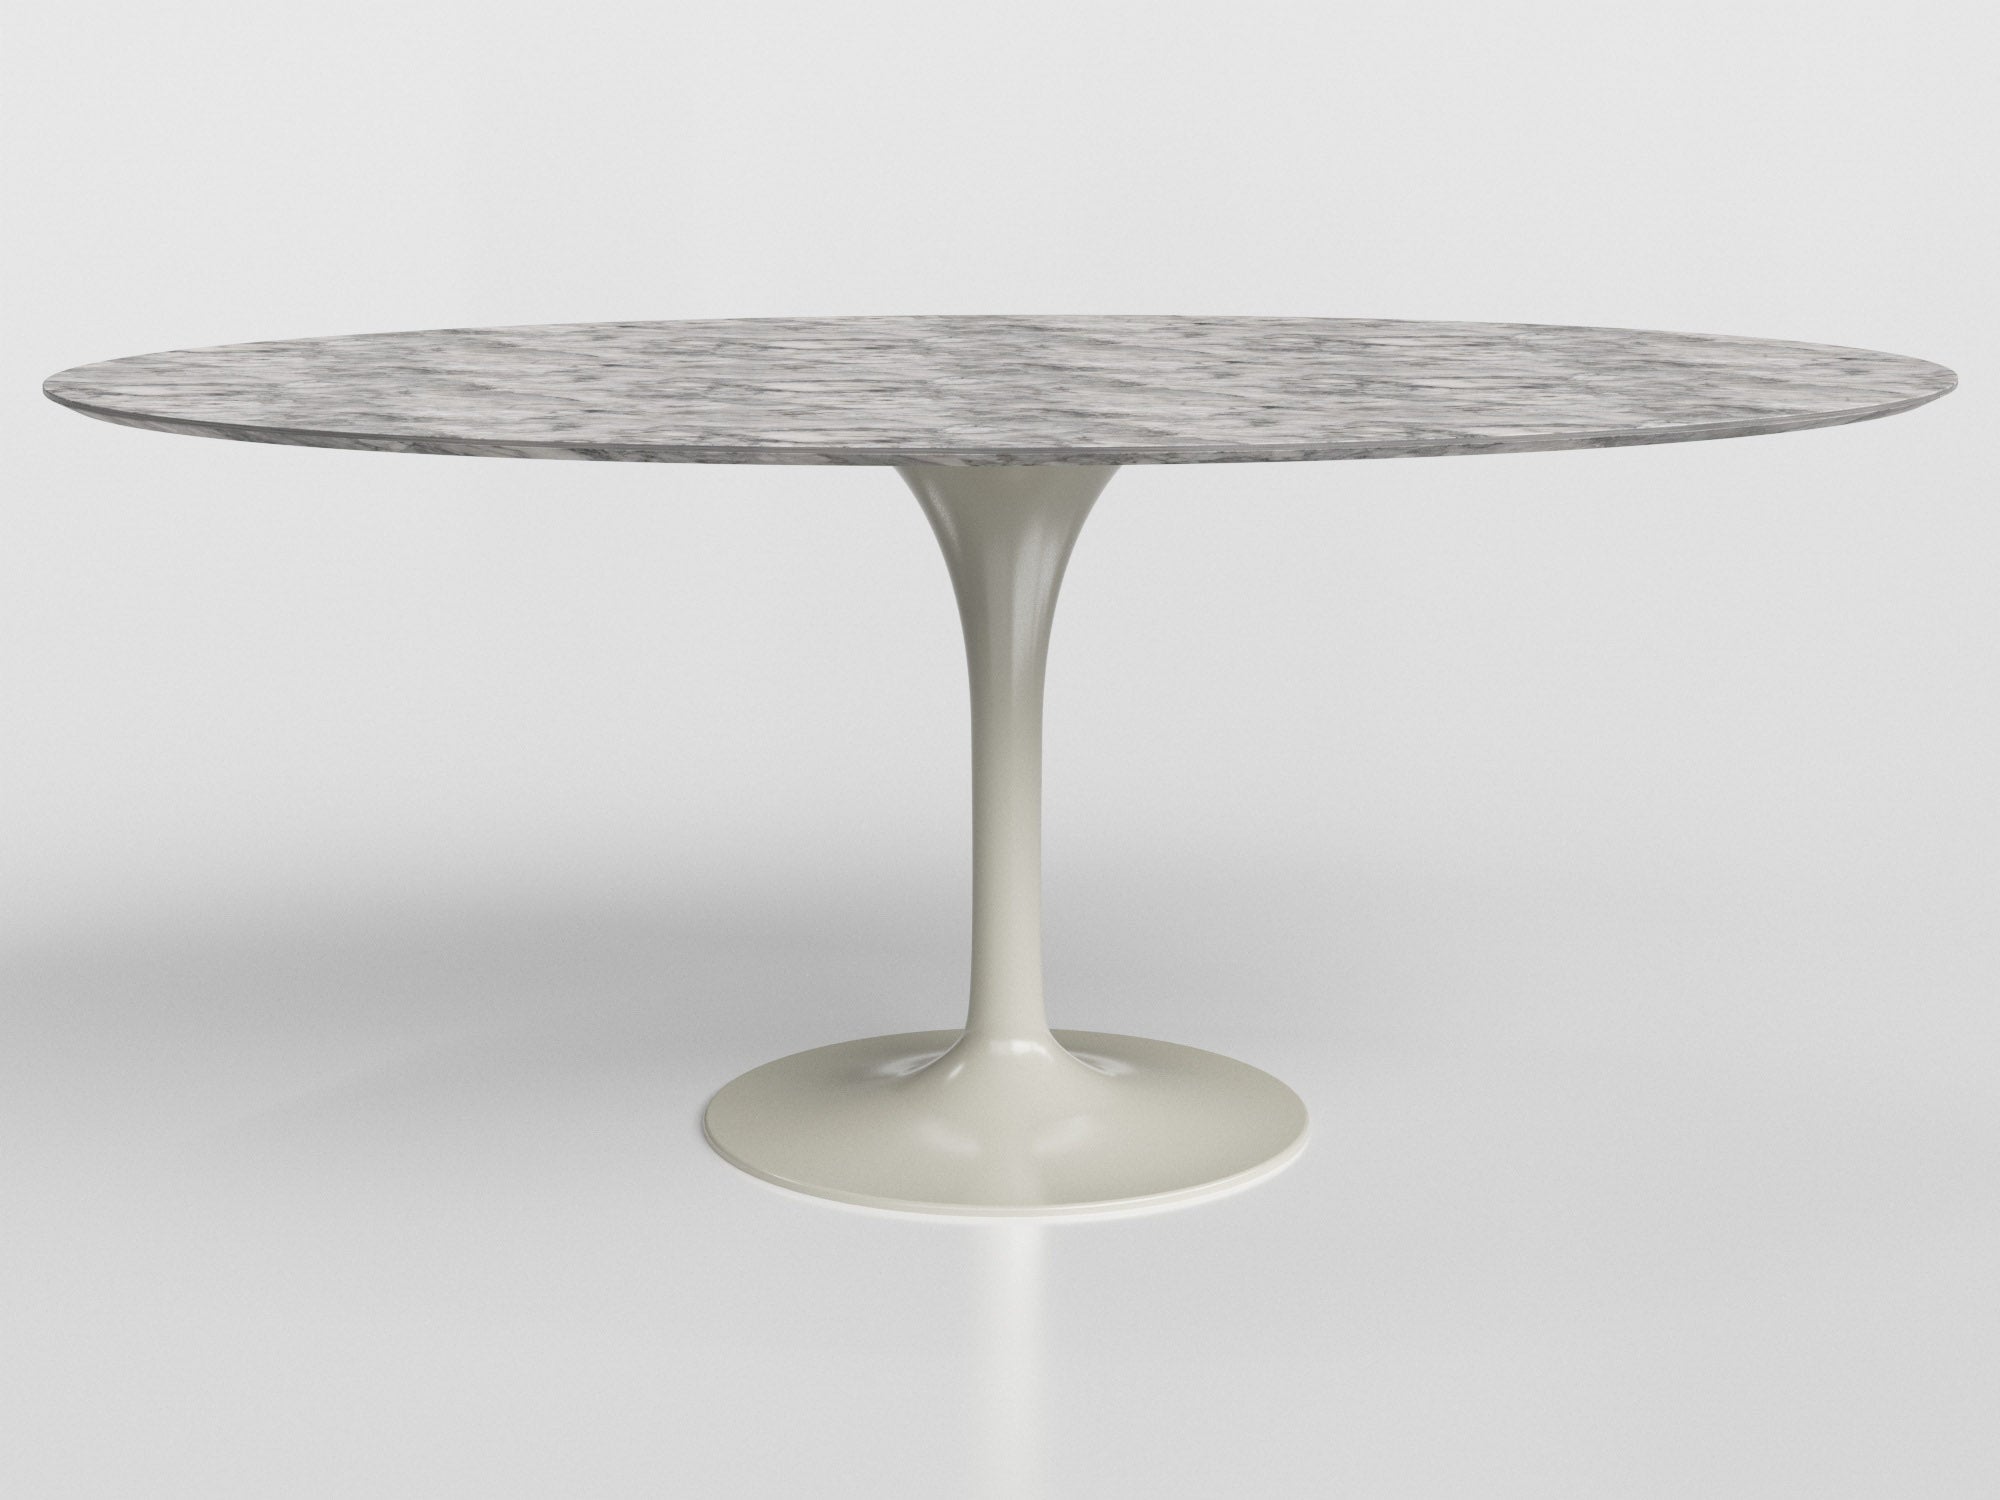 Bora Bora compact dining table with round marble top and gray aluminum base, designed by Luciano Mandelli